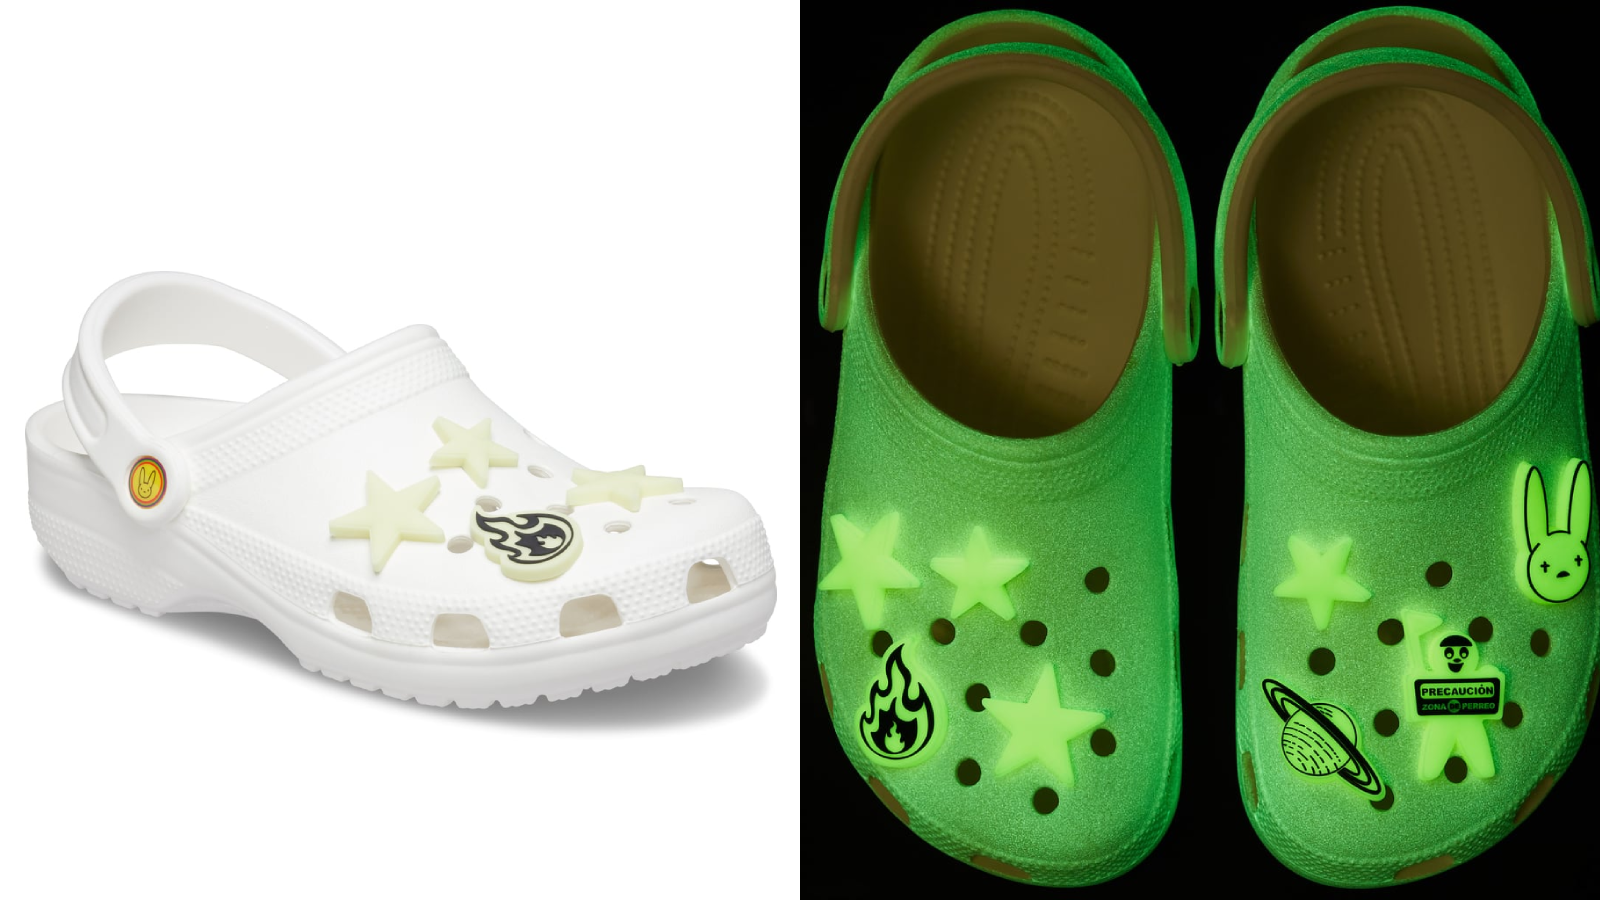 glow-in-the-dark Crocs before they sell out